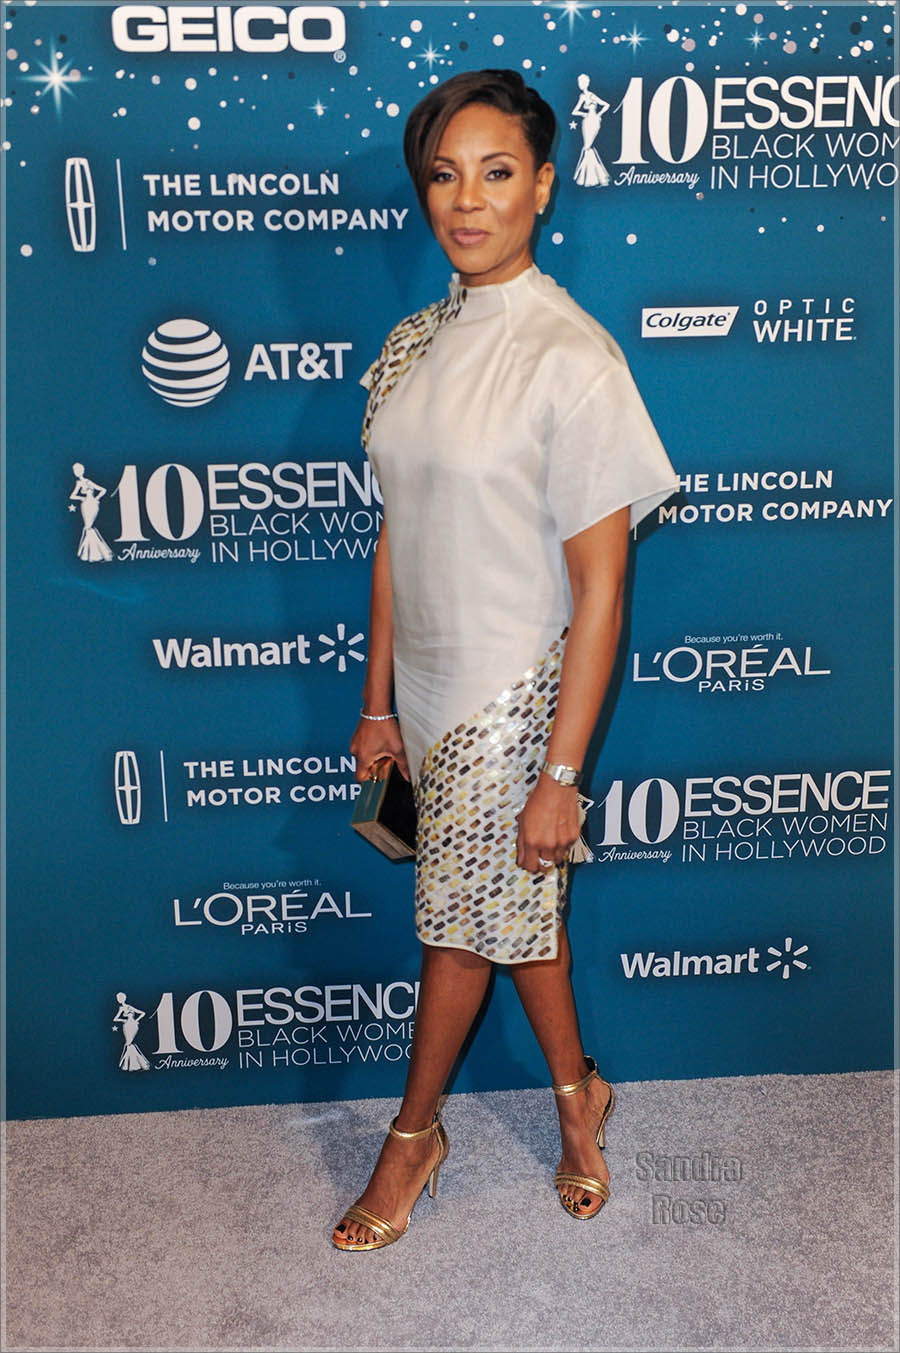 PICS: Stars Attend Essence 10th Annual Black Women in Hollywood Awards Gala